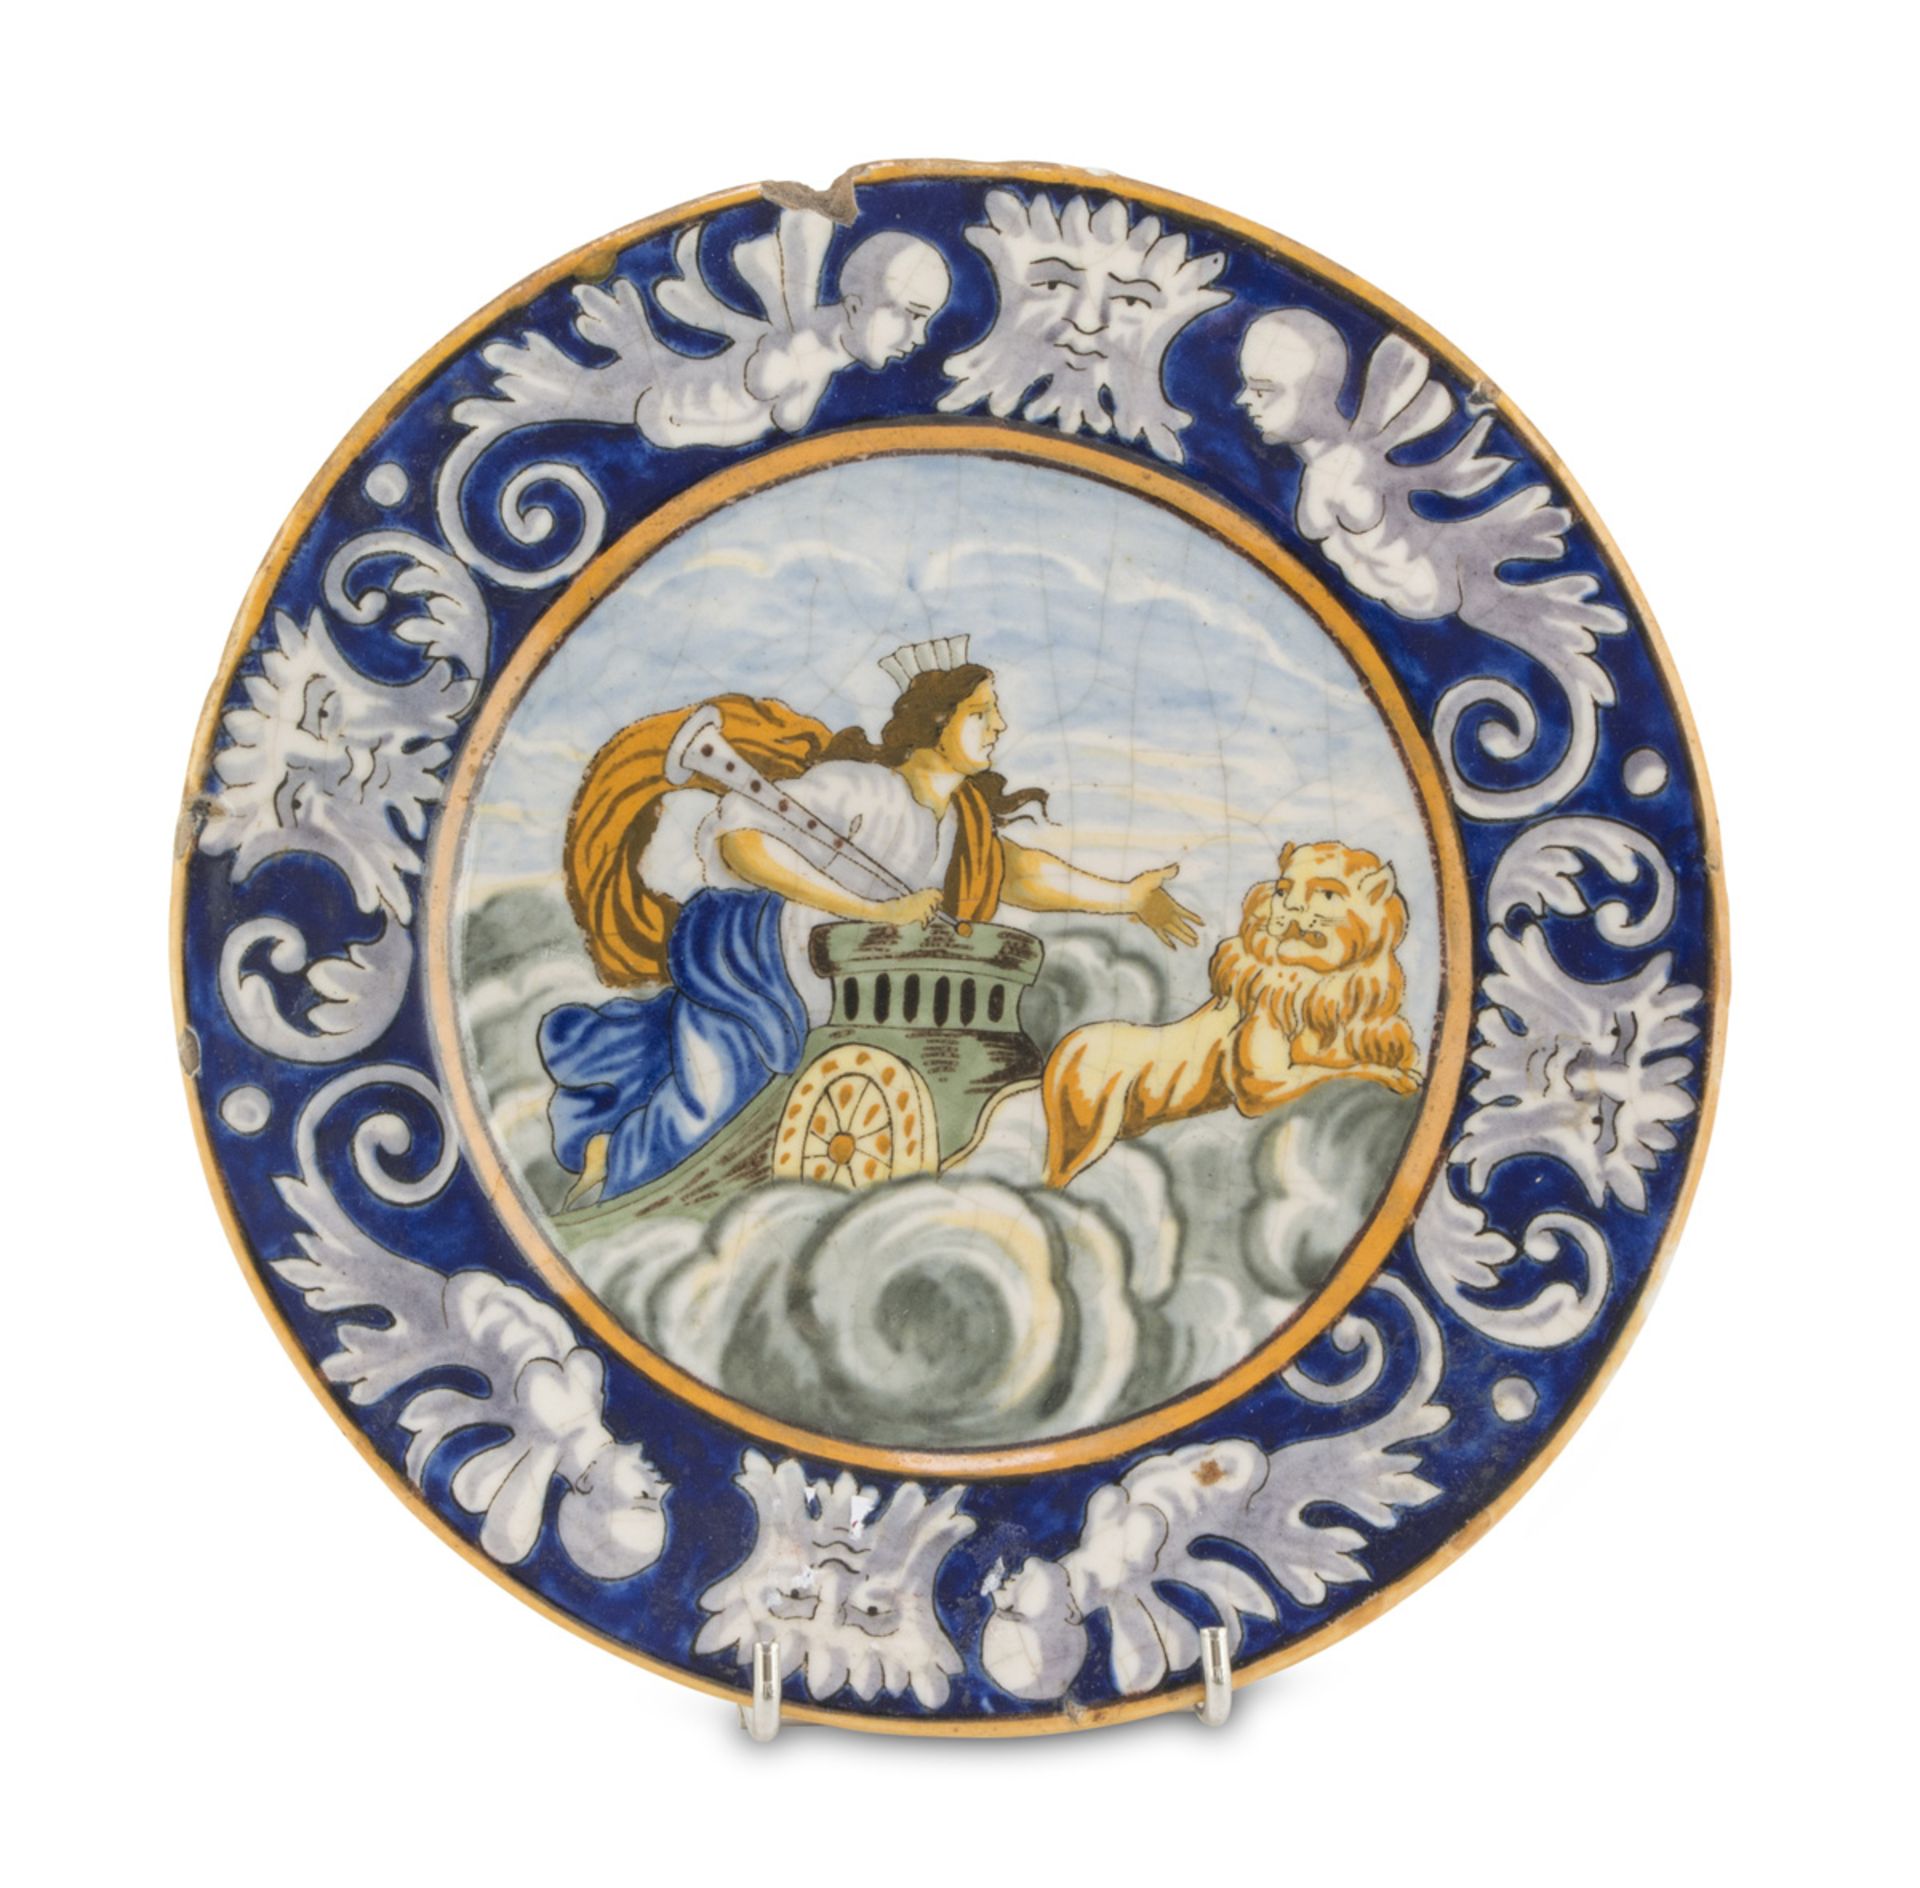 MAIOLICA DISH, NAPLES GIUSTINIANI, LATE 19TH CENTURY in polychromy, decorated with winged victory in